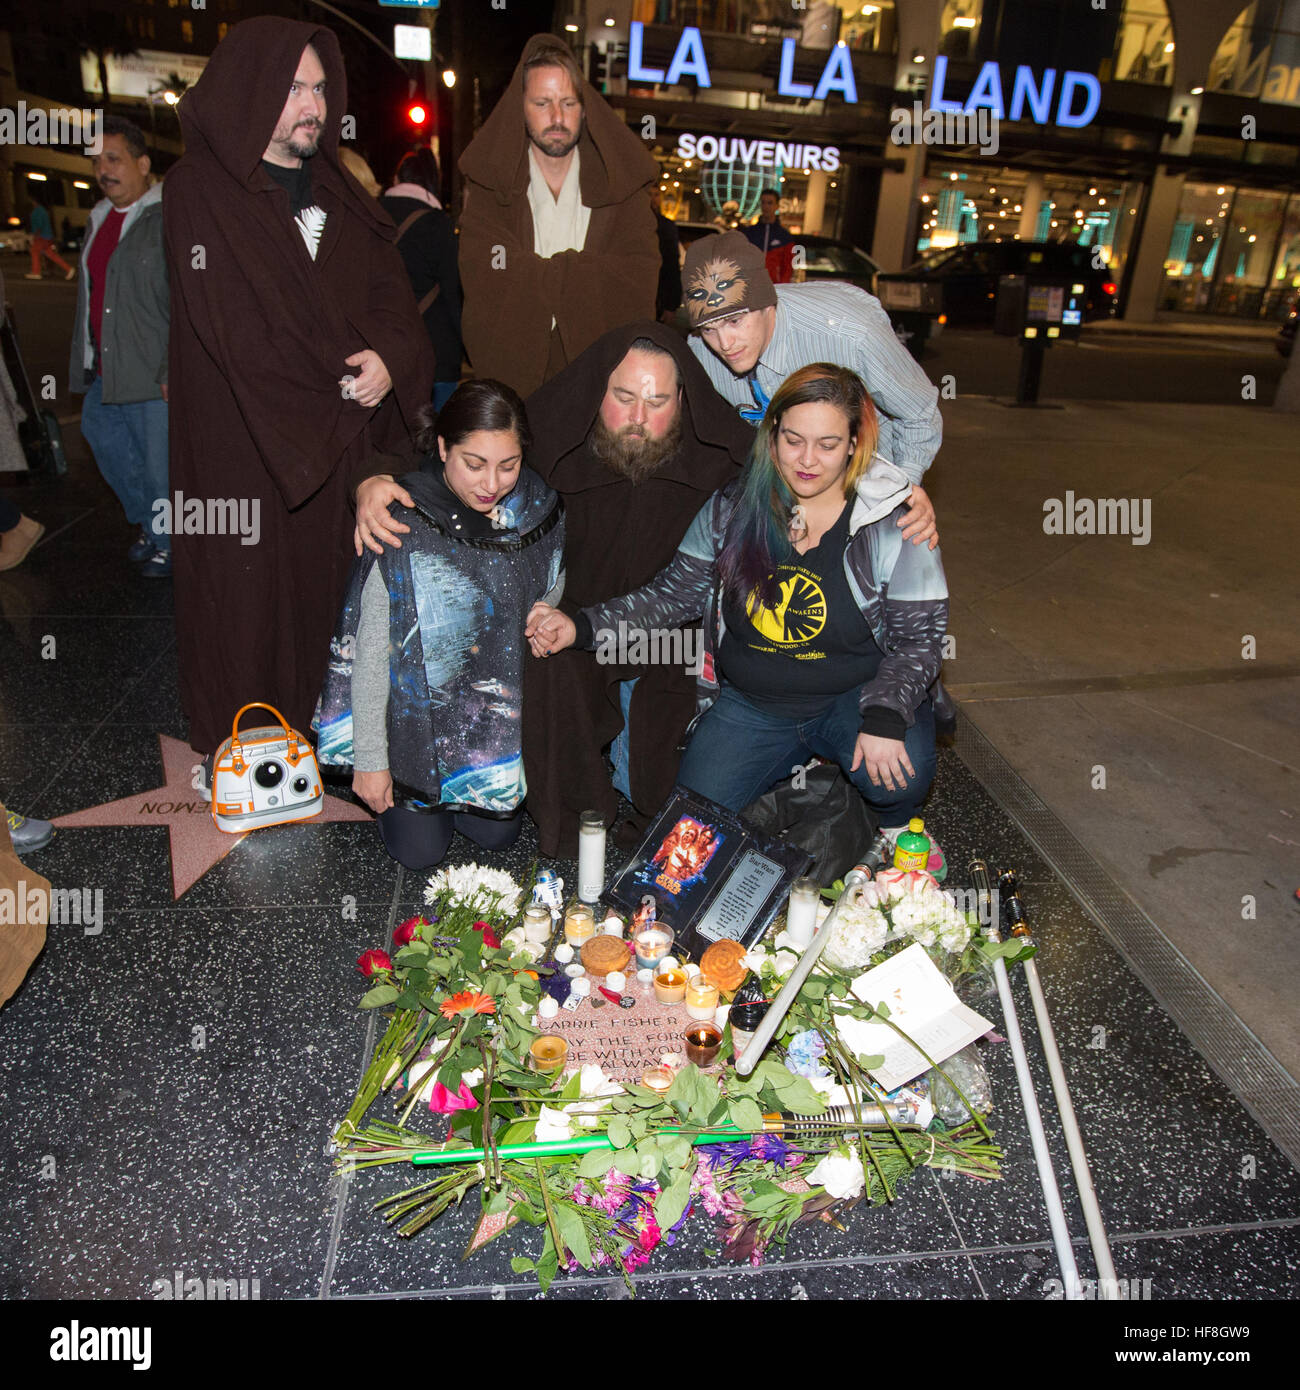 Hollywood, California, USA. 28th December, 2016. Fans of actress Carrie Fisher, who passed away yesterday, gather around a makeshift star on the Hollywood Walk of Fame in Hollywood, California, USA.  As Carrie Fisher does not have an official star on the Hollywood Walk of Fame, her fans created one from a blank star near the historic TCL Chinese Theatre (originally Grauman's Chinese Theatre) where Star Wars movies have had their premieres. Credit:  Sheri Determan/Alamy Live News Stock Photo